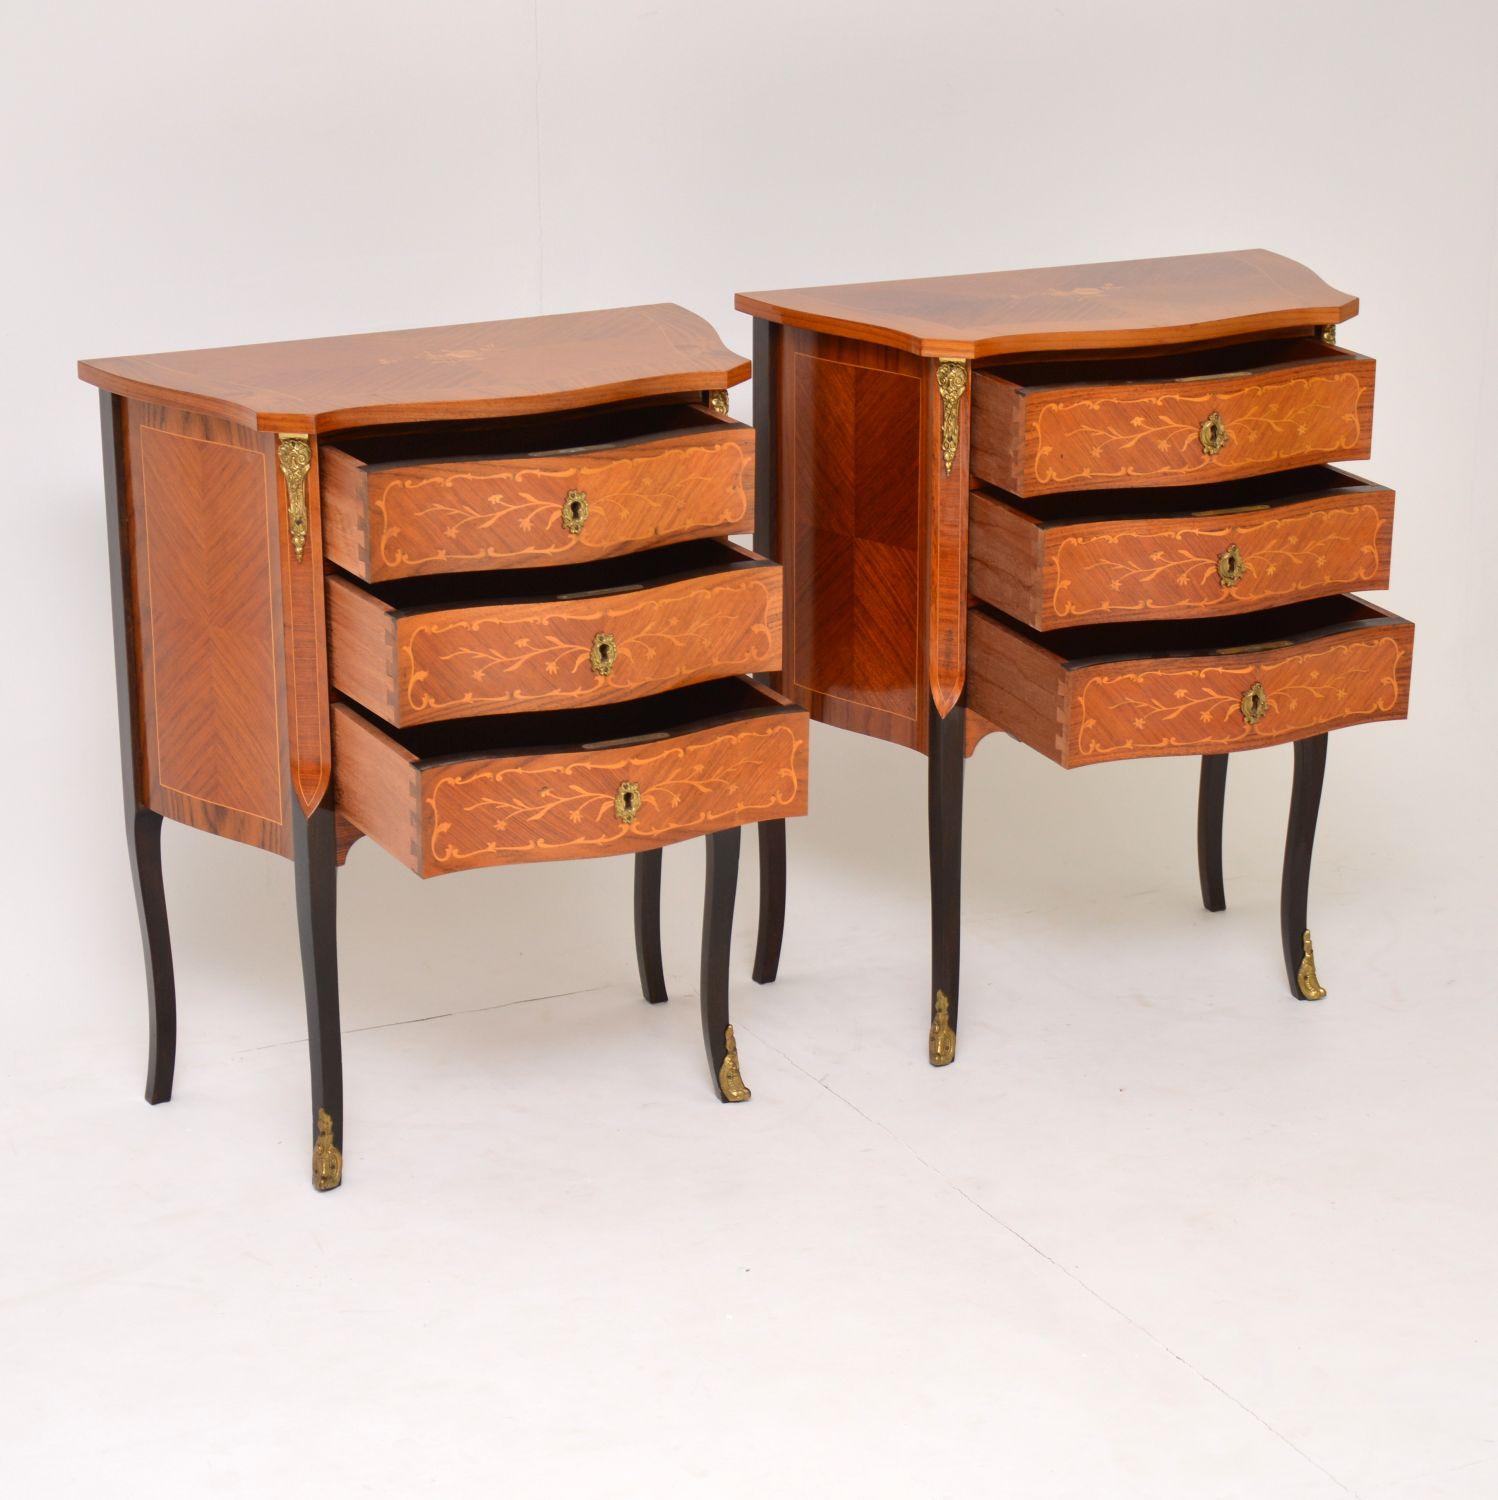 Pair of Antique French Inlaid Kingwood Chests 1